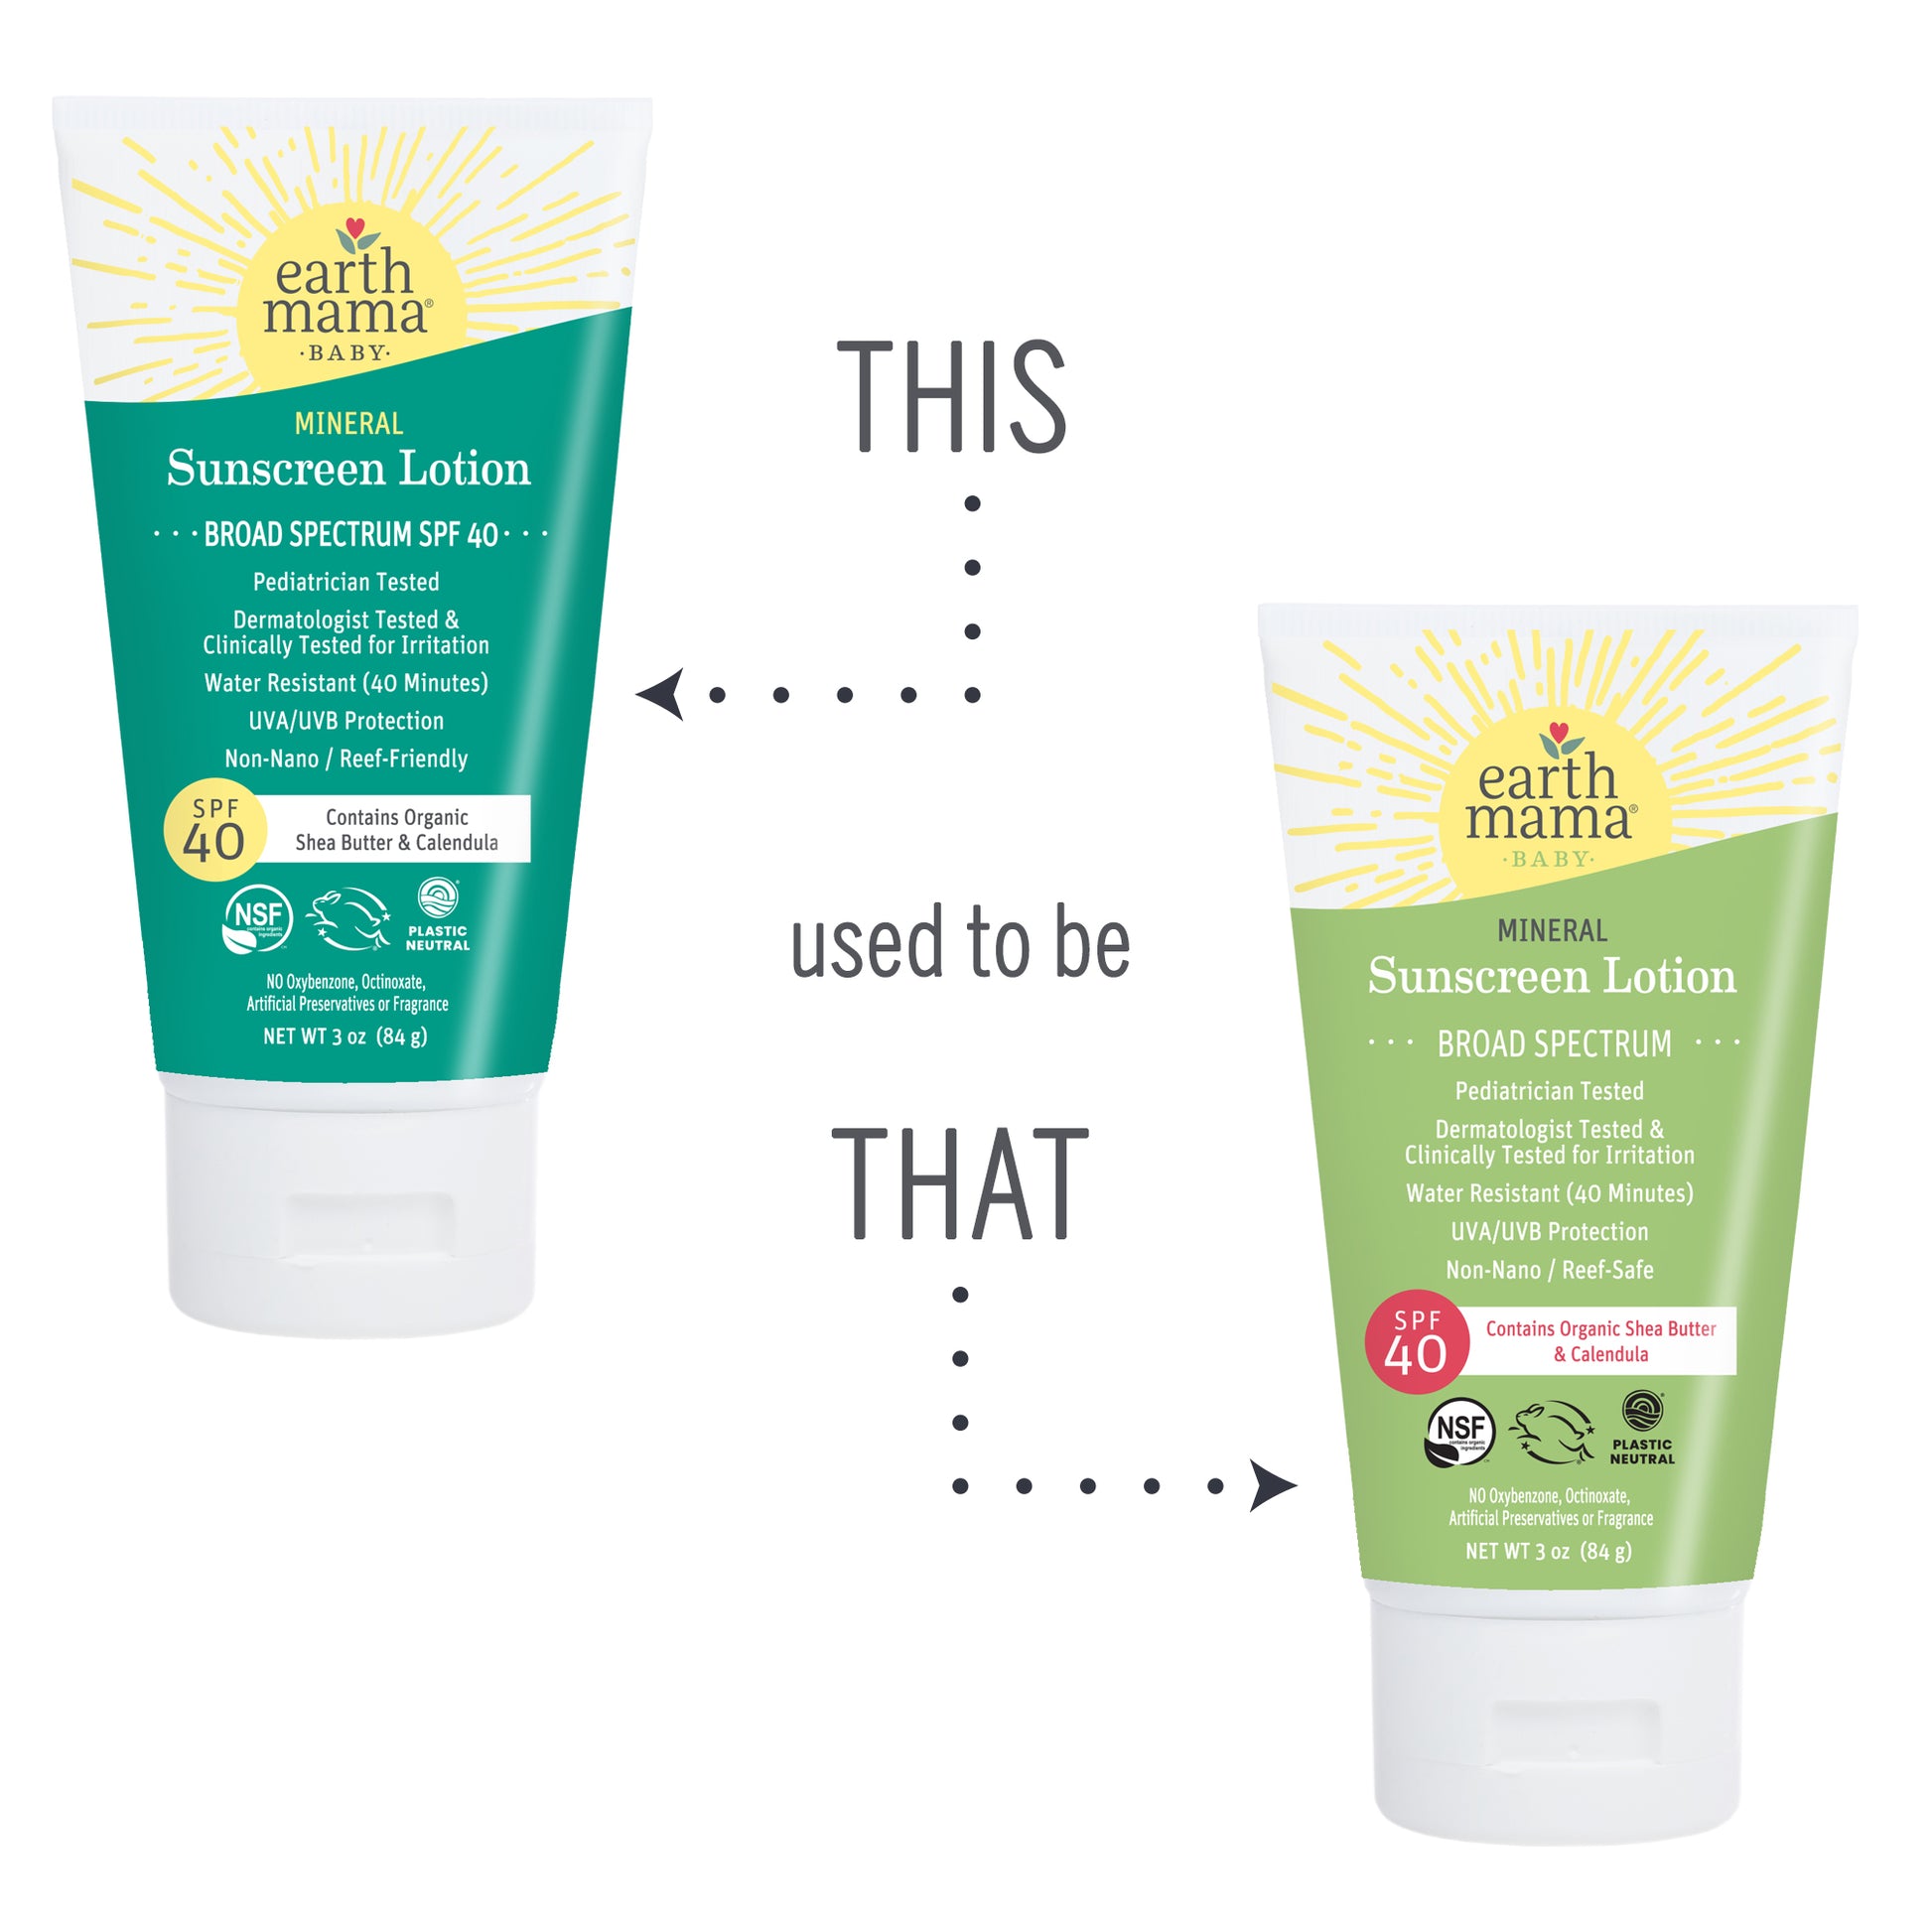 New packaging for Baby Mineral Sunscreen Lotion SPF 40